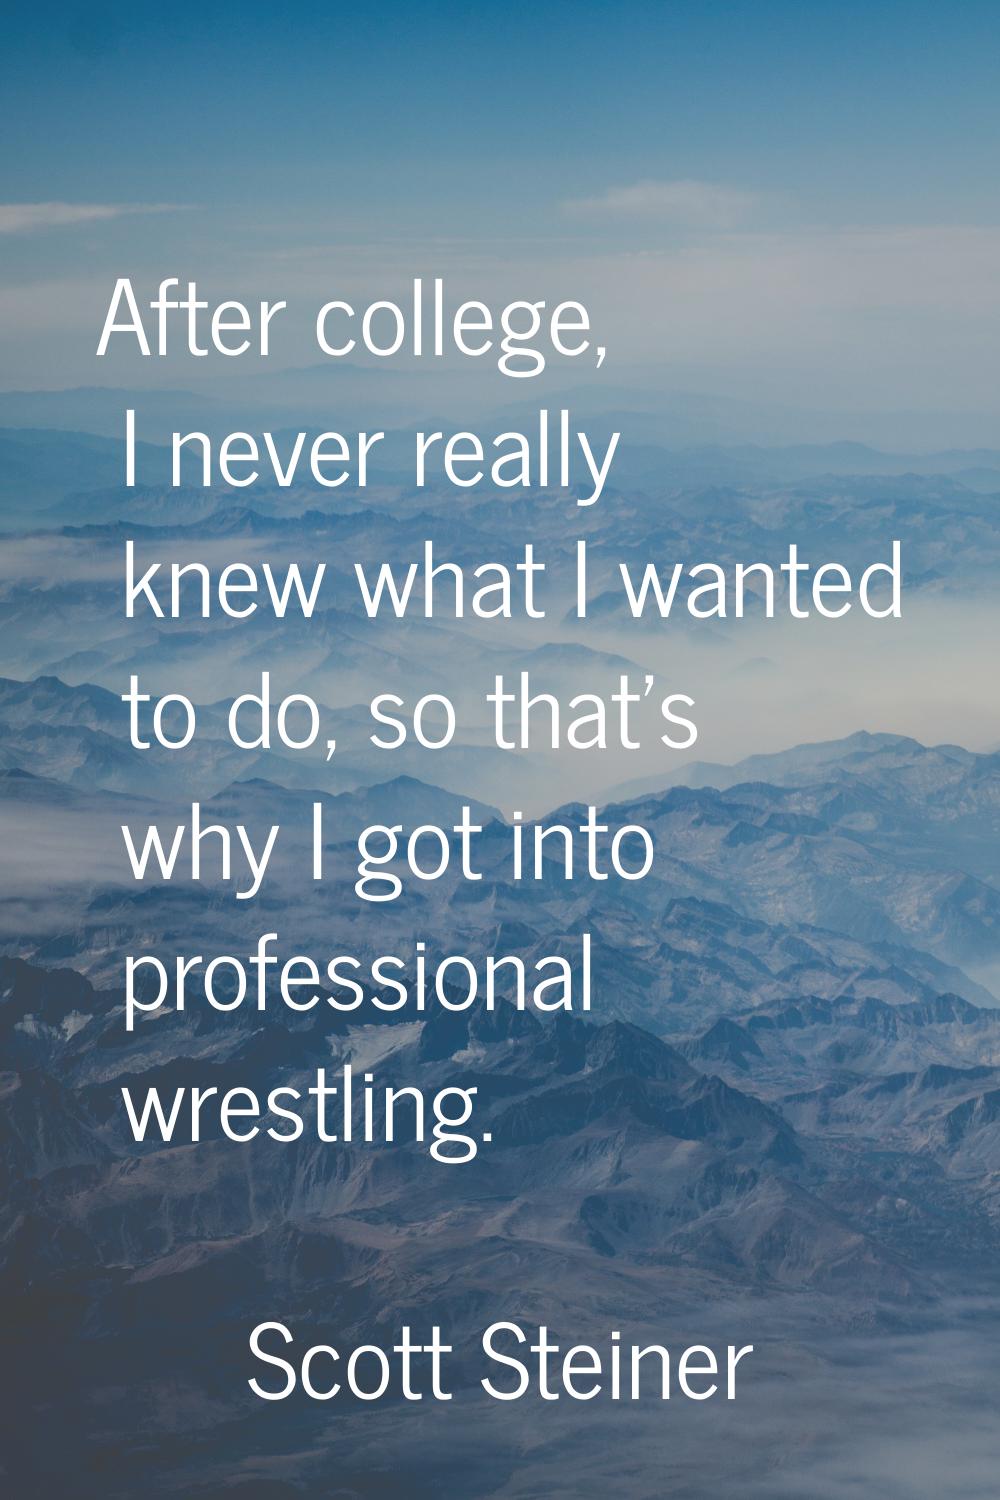 After college, I never really knew what I wanted to do, so that's why I got into professional wrest